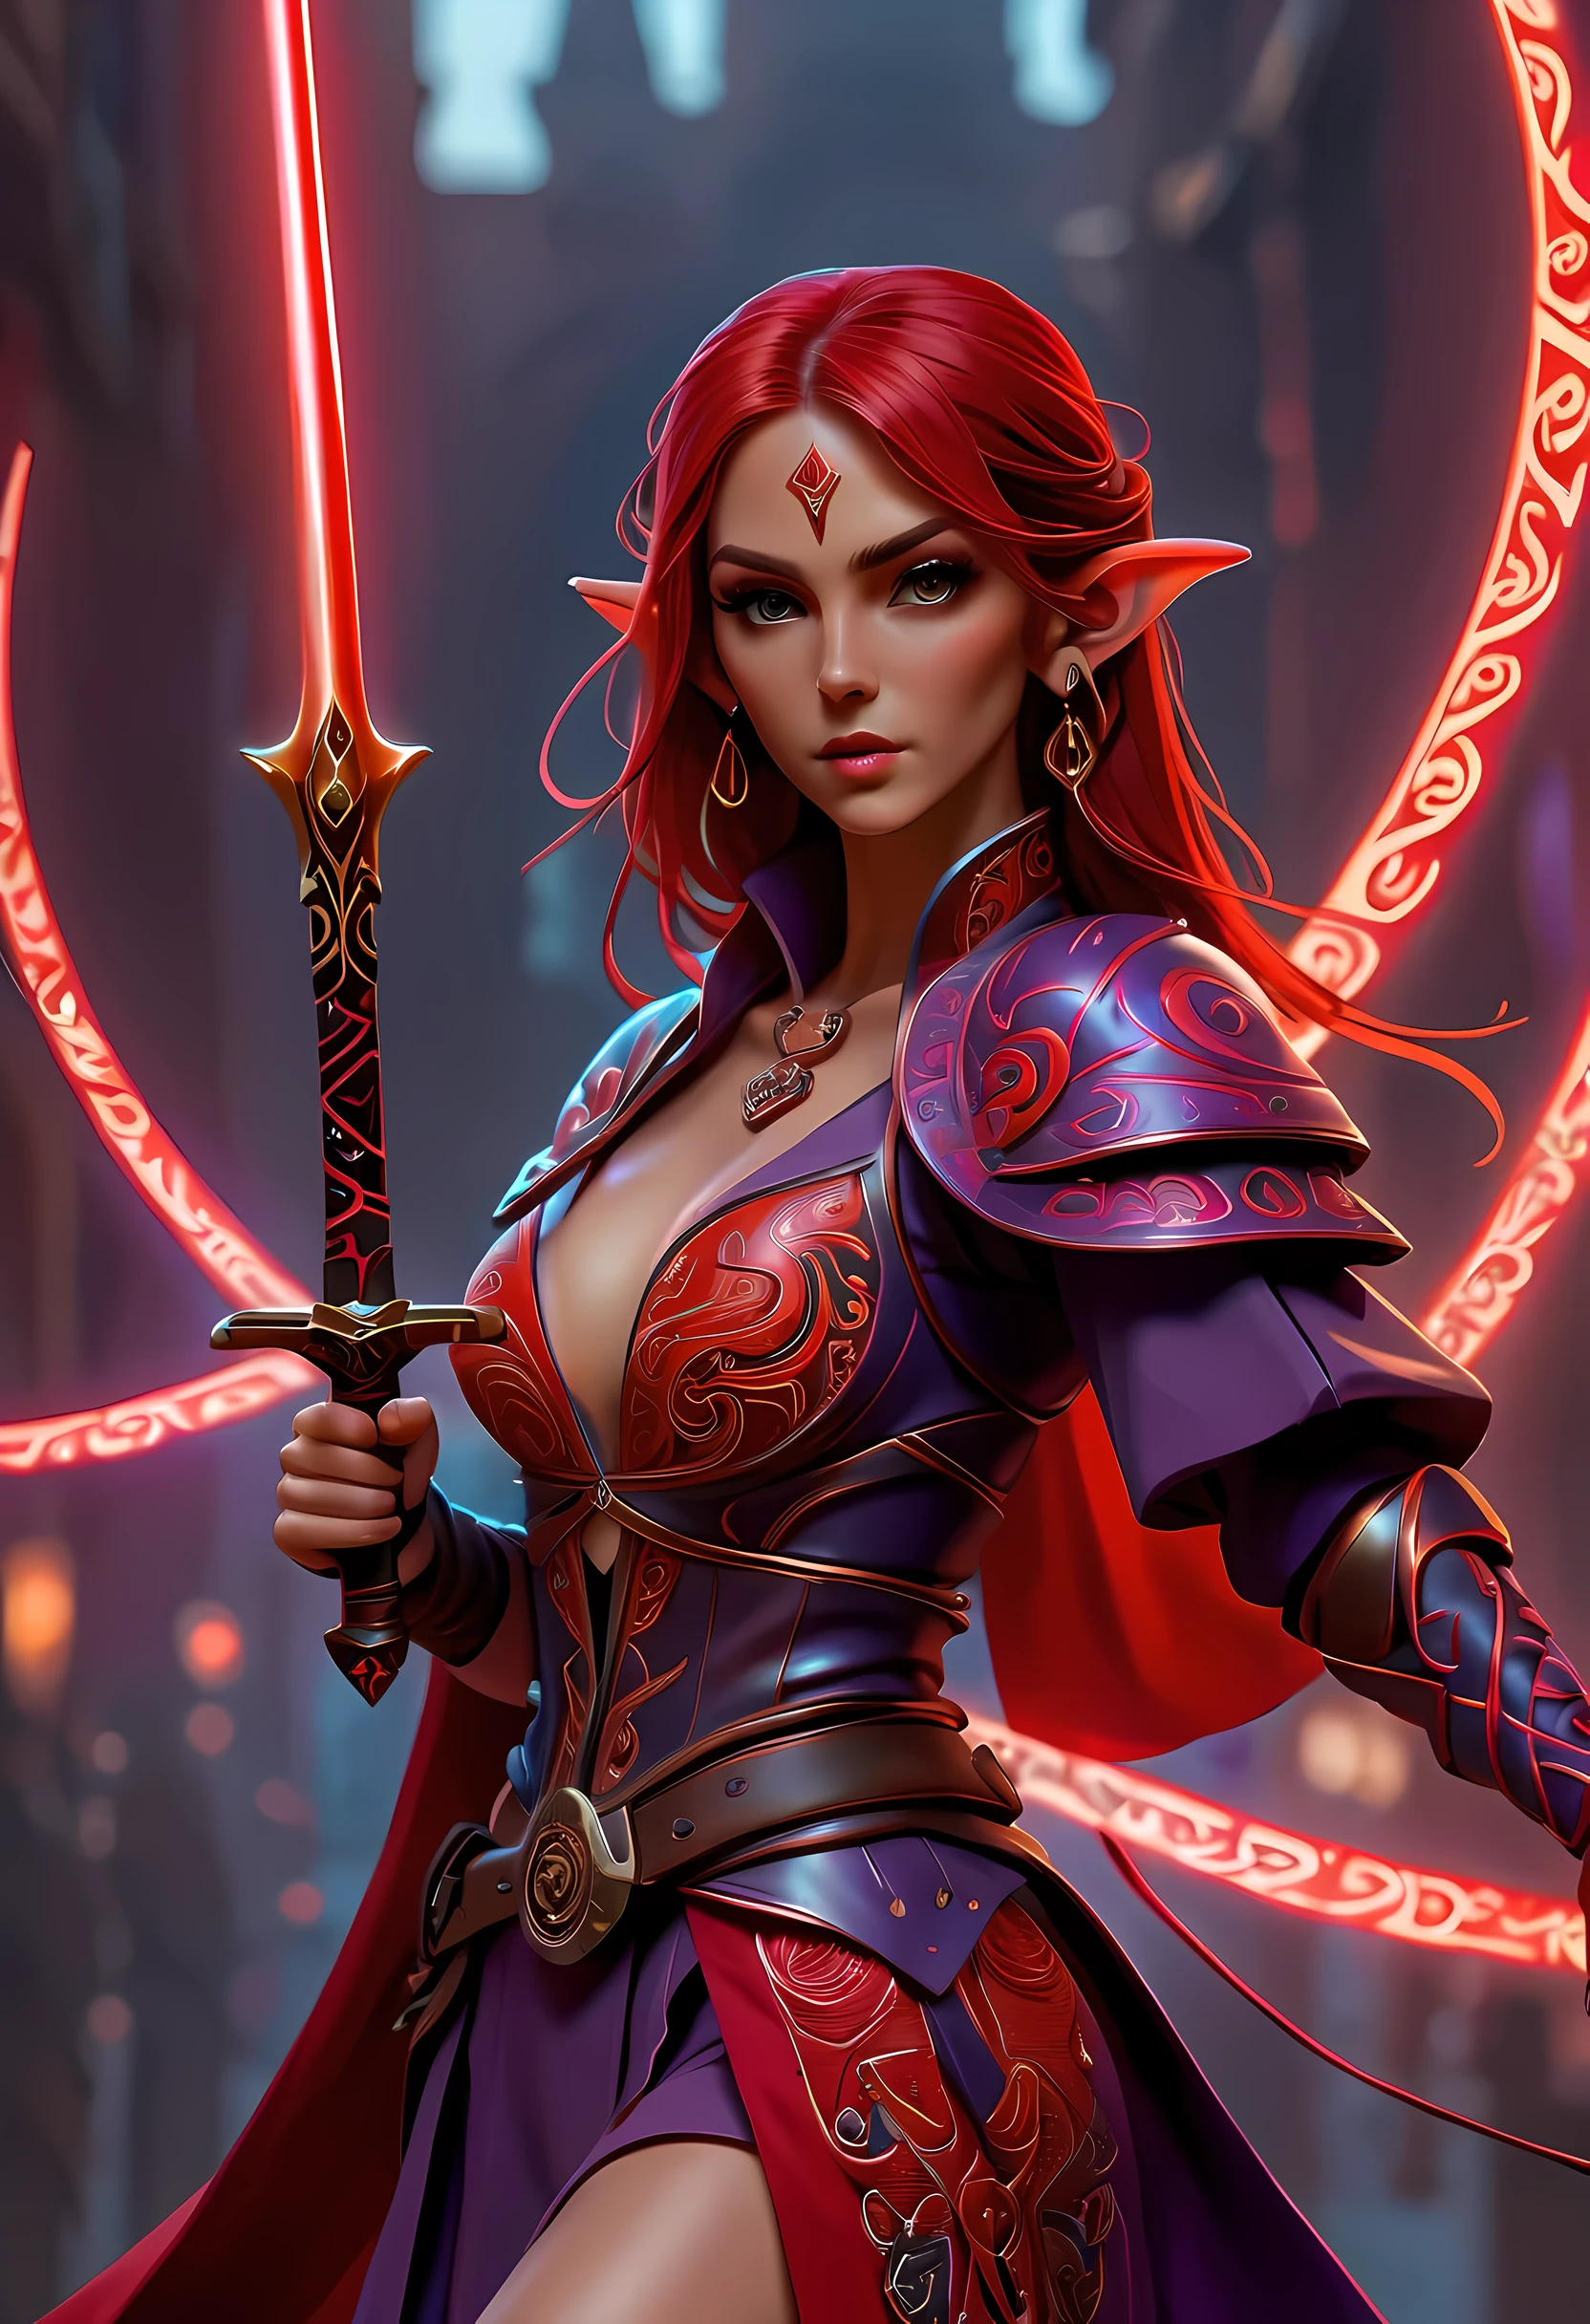 a picture of a female elf (intense details, Masterpiece, best quality: 1.5) fantasy swashbuckler, fantasy fencer, armed with a slim sword, shinning sword, metallic shine, colorful clothes, dynamic clothing, an ultra wide shot, full body (intense details, Masterpiece, best quality: 1.5)epic beautiful female elf (intense details, Masterpiece, best quality: 1.5), rich hair, braided hair, small pointed ears, GlowingRunesAI_red  [colorful magical sigils in the air],[ colorful arcane markings floating] (intricate details, Masterpiece, best quality: 1.6), holding a [sword] (intricate details, Masterpiece, best quality: 1.6) holding a [sword glowing in red light]fantasy urban street (intense details, Masterpiece, best quality: 1.5),  purple cloak, long cloak (intense details, Masterpiece, best quality: 1.5), sense of daring, sense of adventure,  high details, best quality, 8k, [ultra detailed], masterpiece, best quality, (extremely detailed), dynamic angle, ultra wide shot, photorealistic, RAW, fantasy art, dnd art,fantasy art, realistic art,